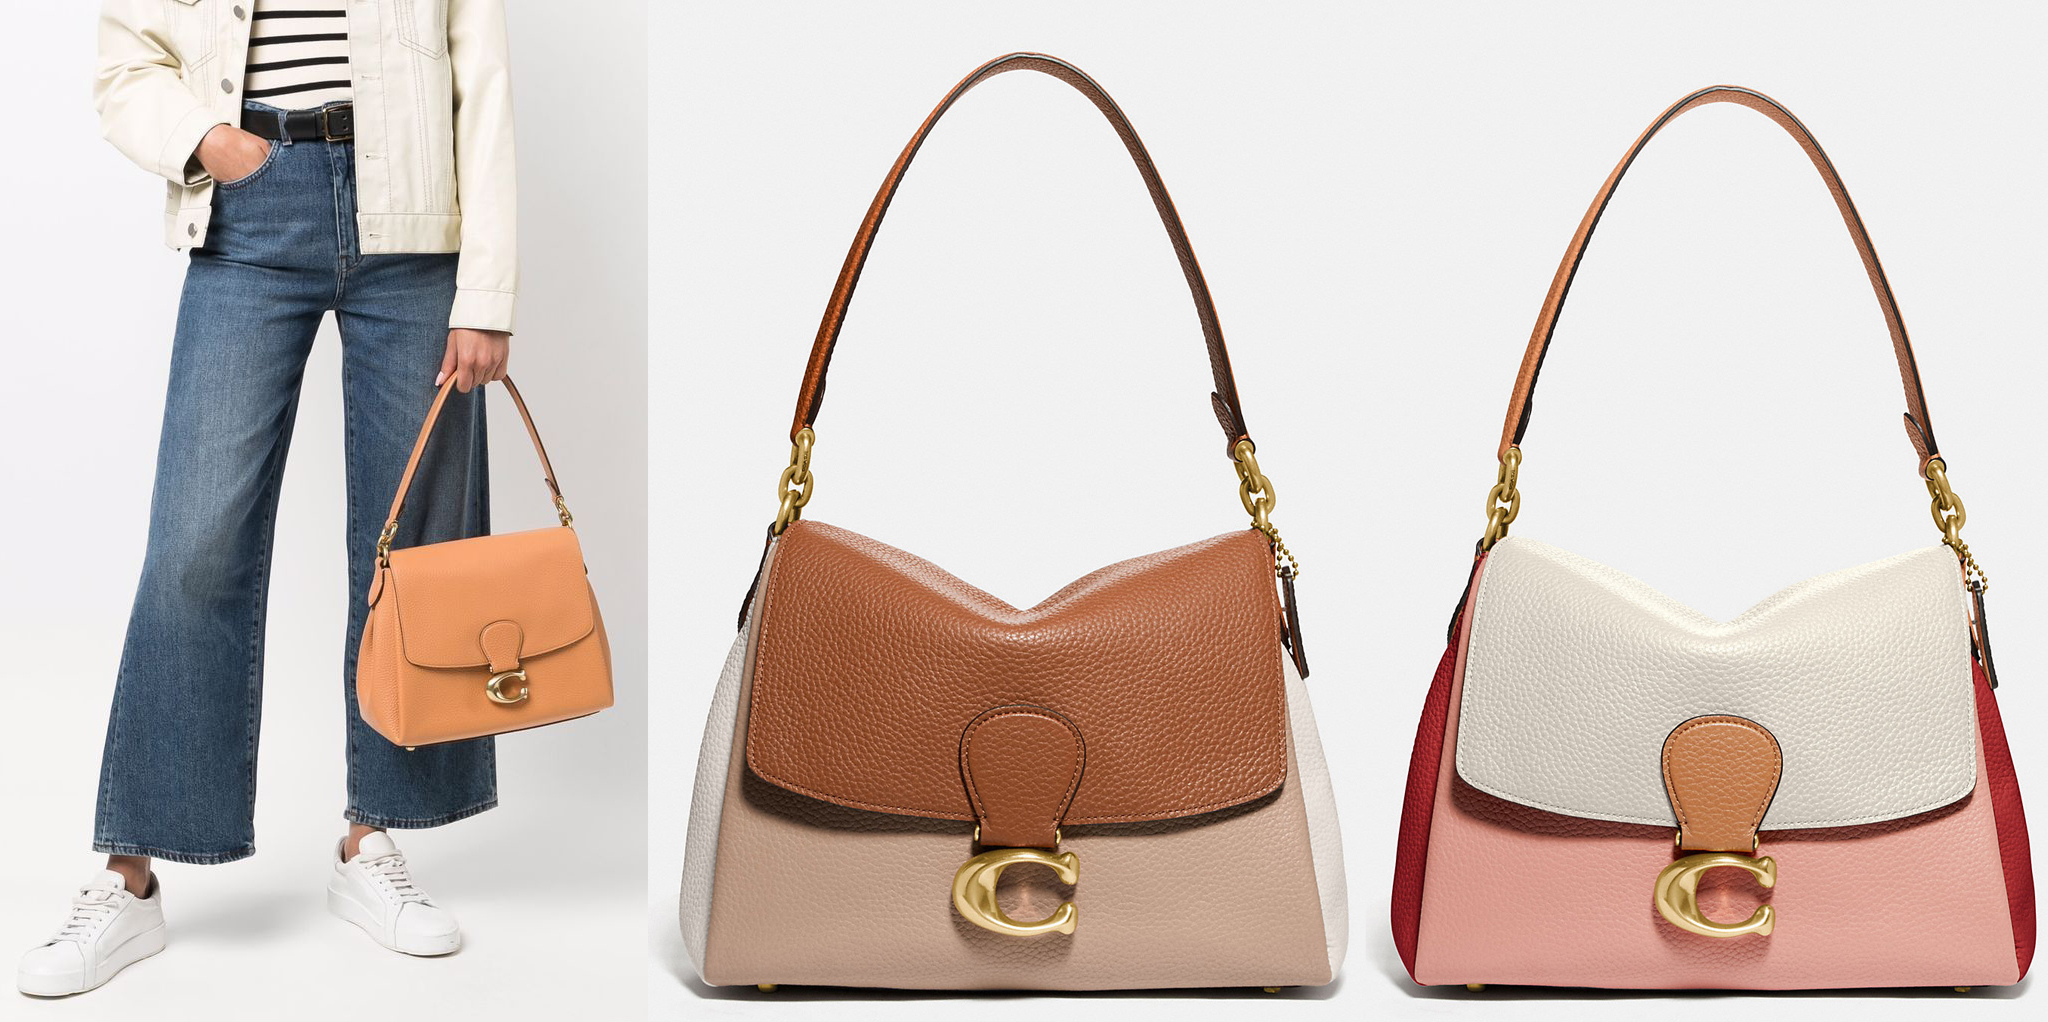 Featuring a minimalist timeless design, the Coach May bag has the classic C logo hardware on the front flap